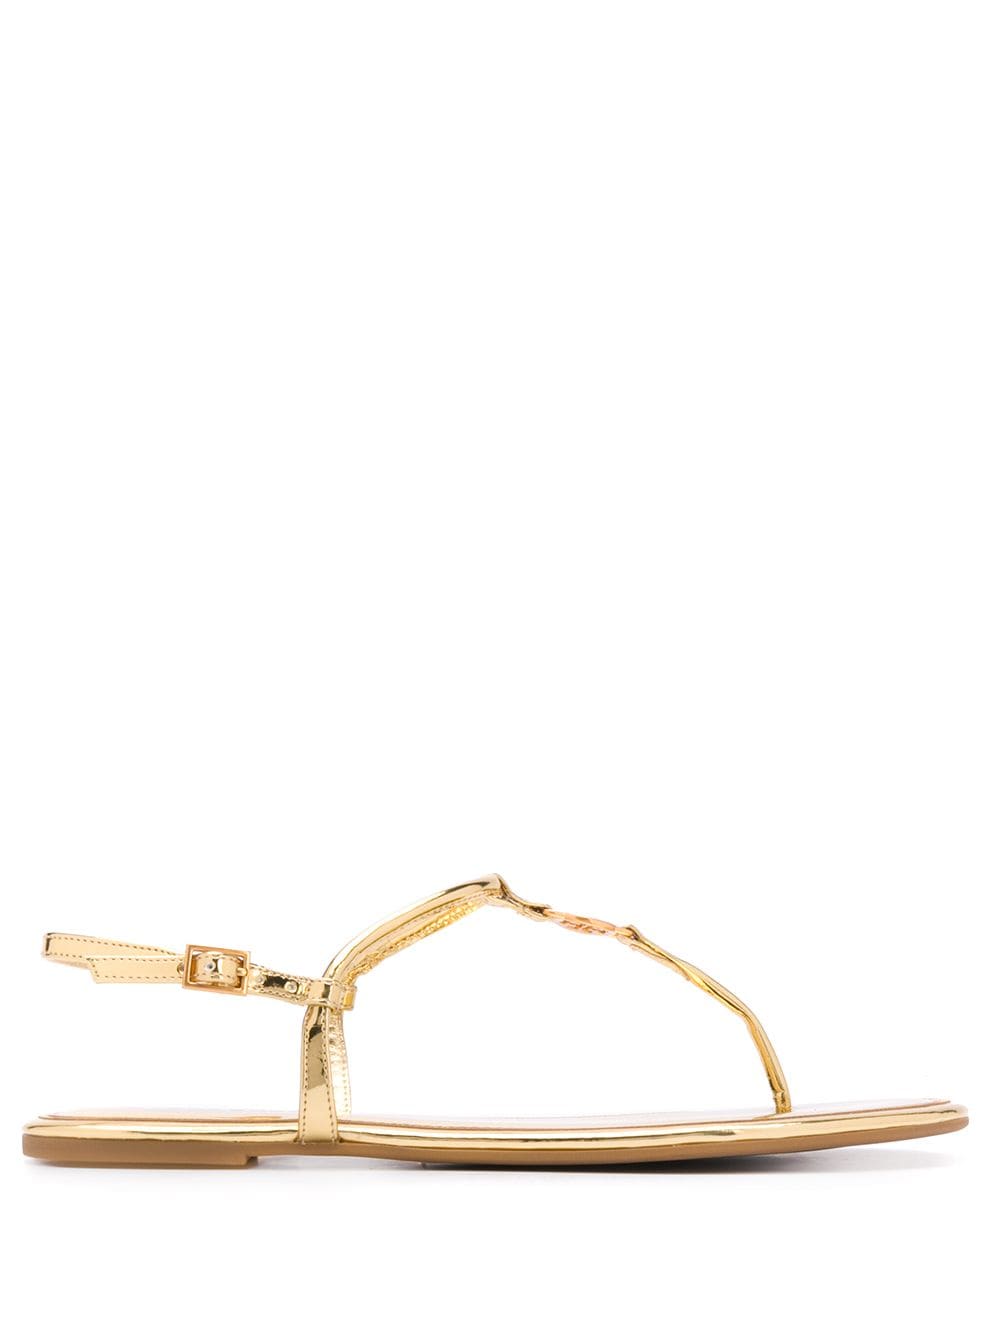 Tory Burch - Flat Strap Sandals - Gold | ABOUT ICONS